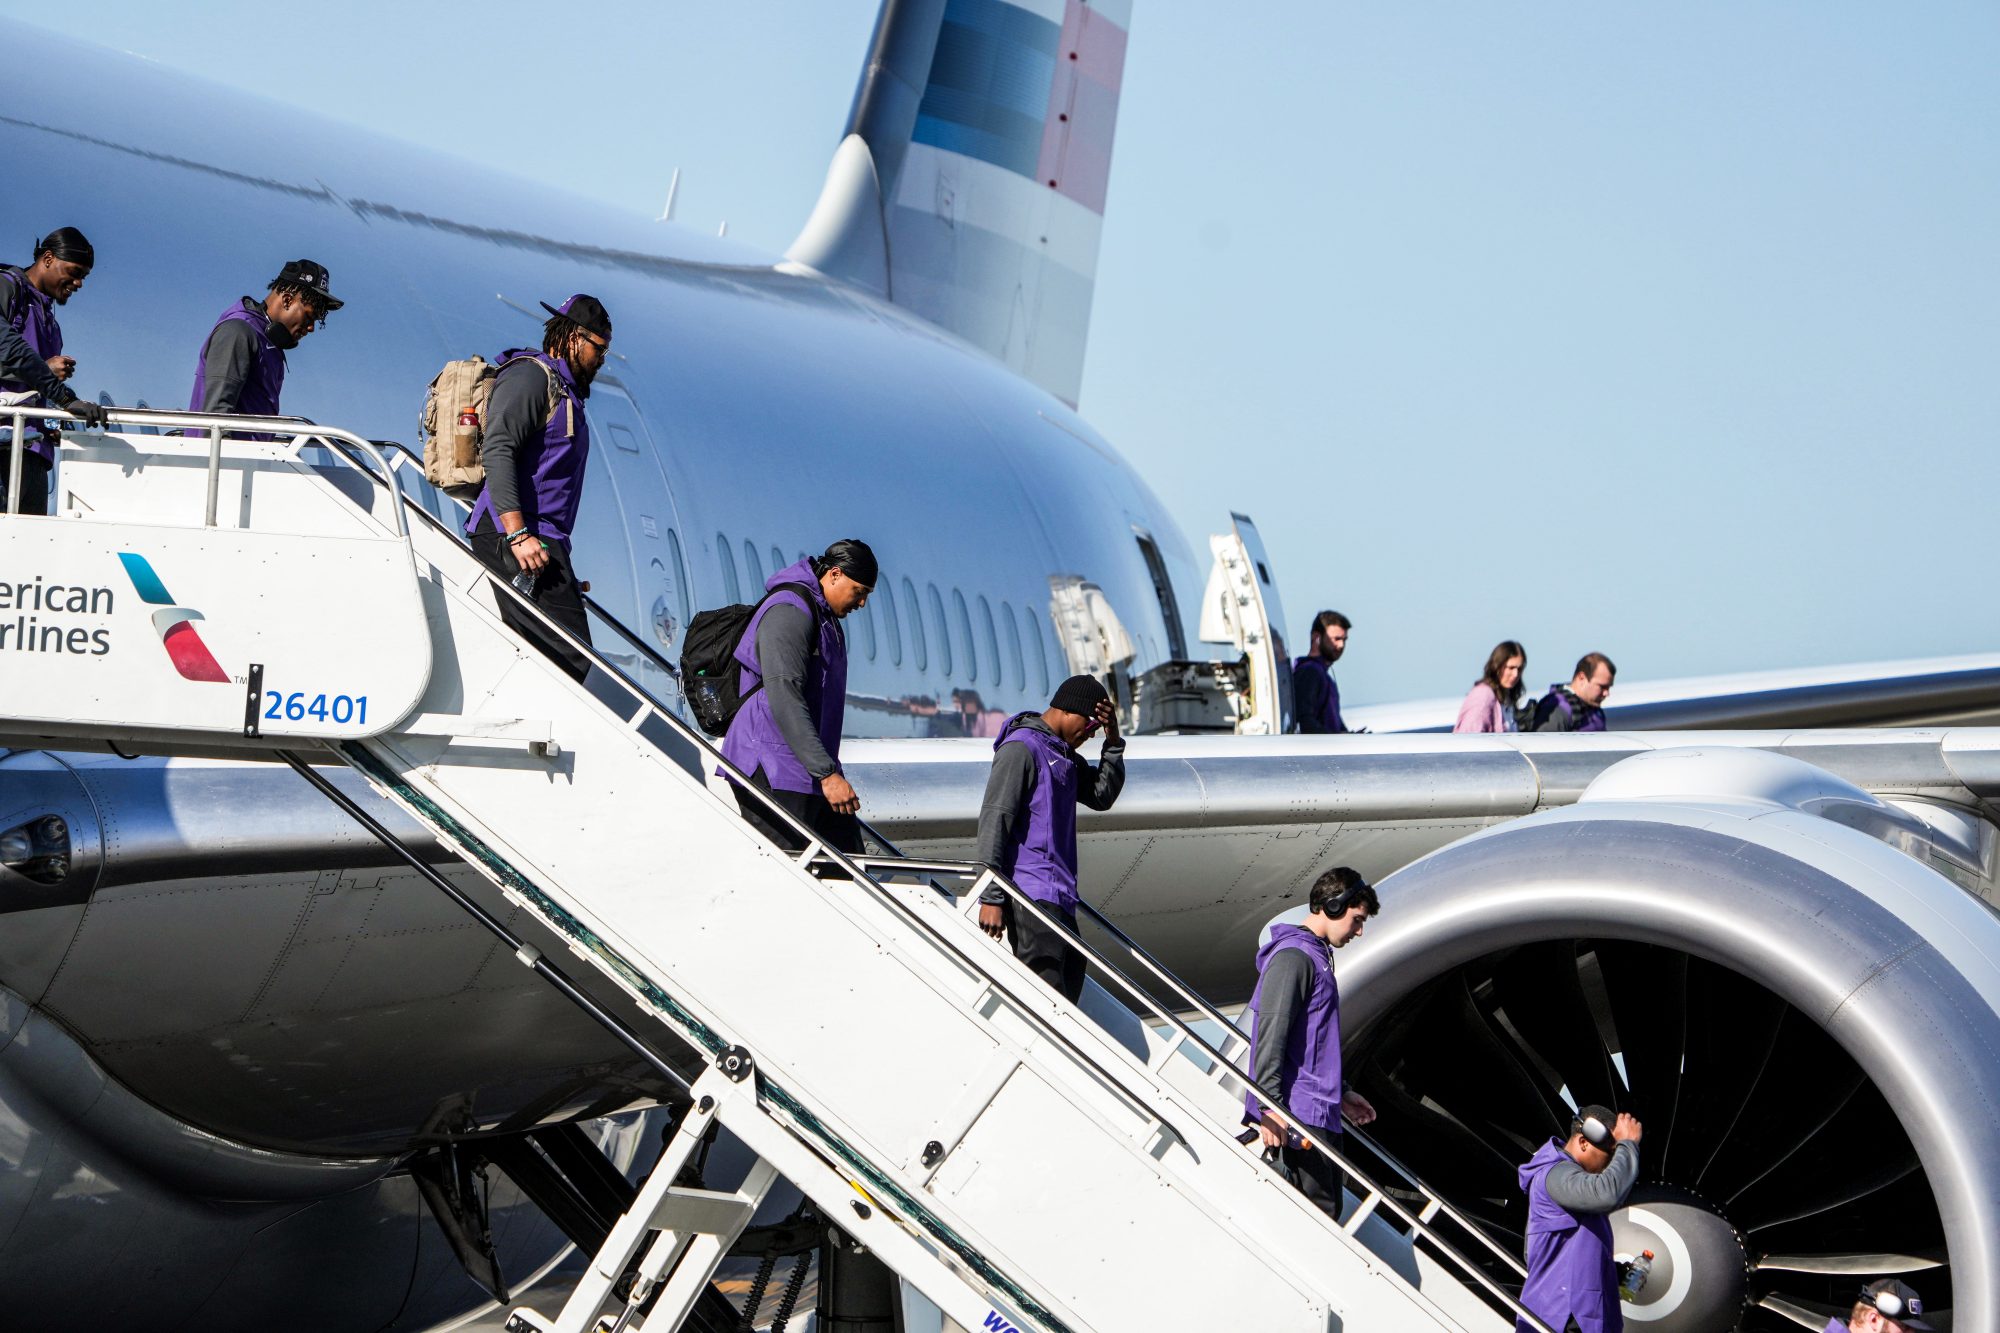 Jan 6, 2023; Los Angeles, California, USA; TCU Horned Frogs players disembark an American Airlines plane after arriving at Los Angeles International Airport prior to the College Football National Championship.